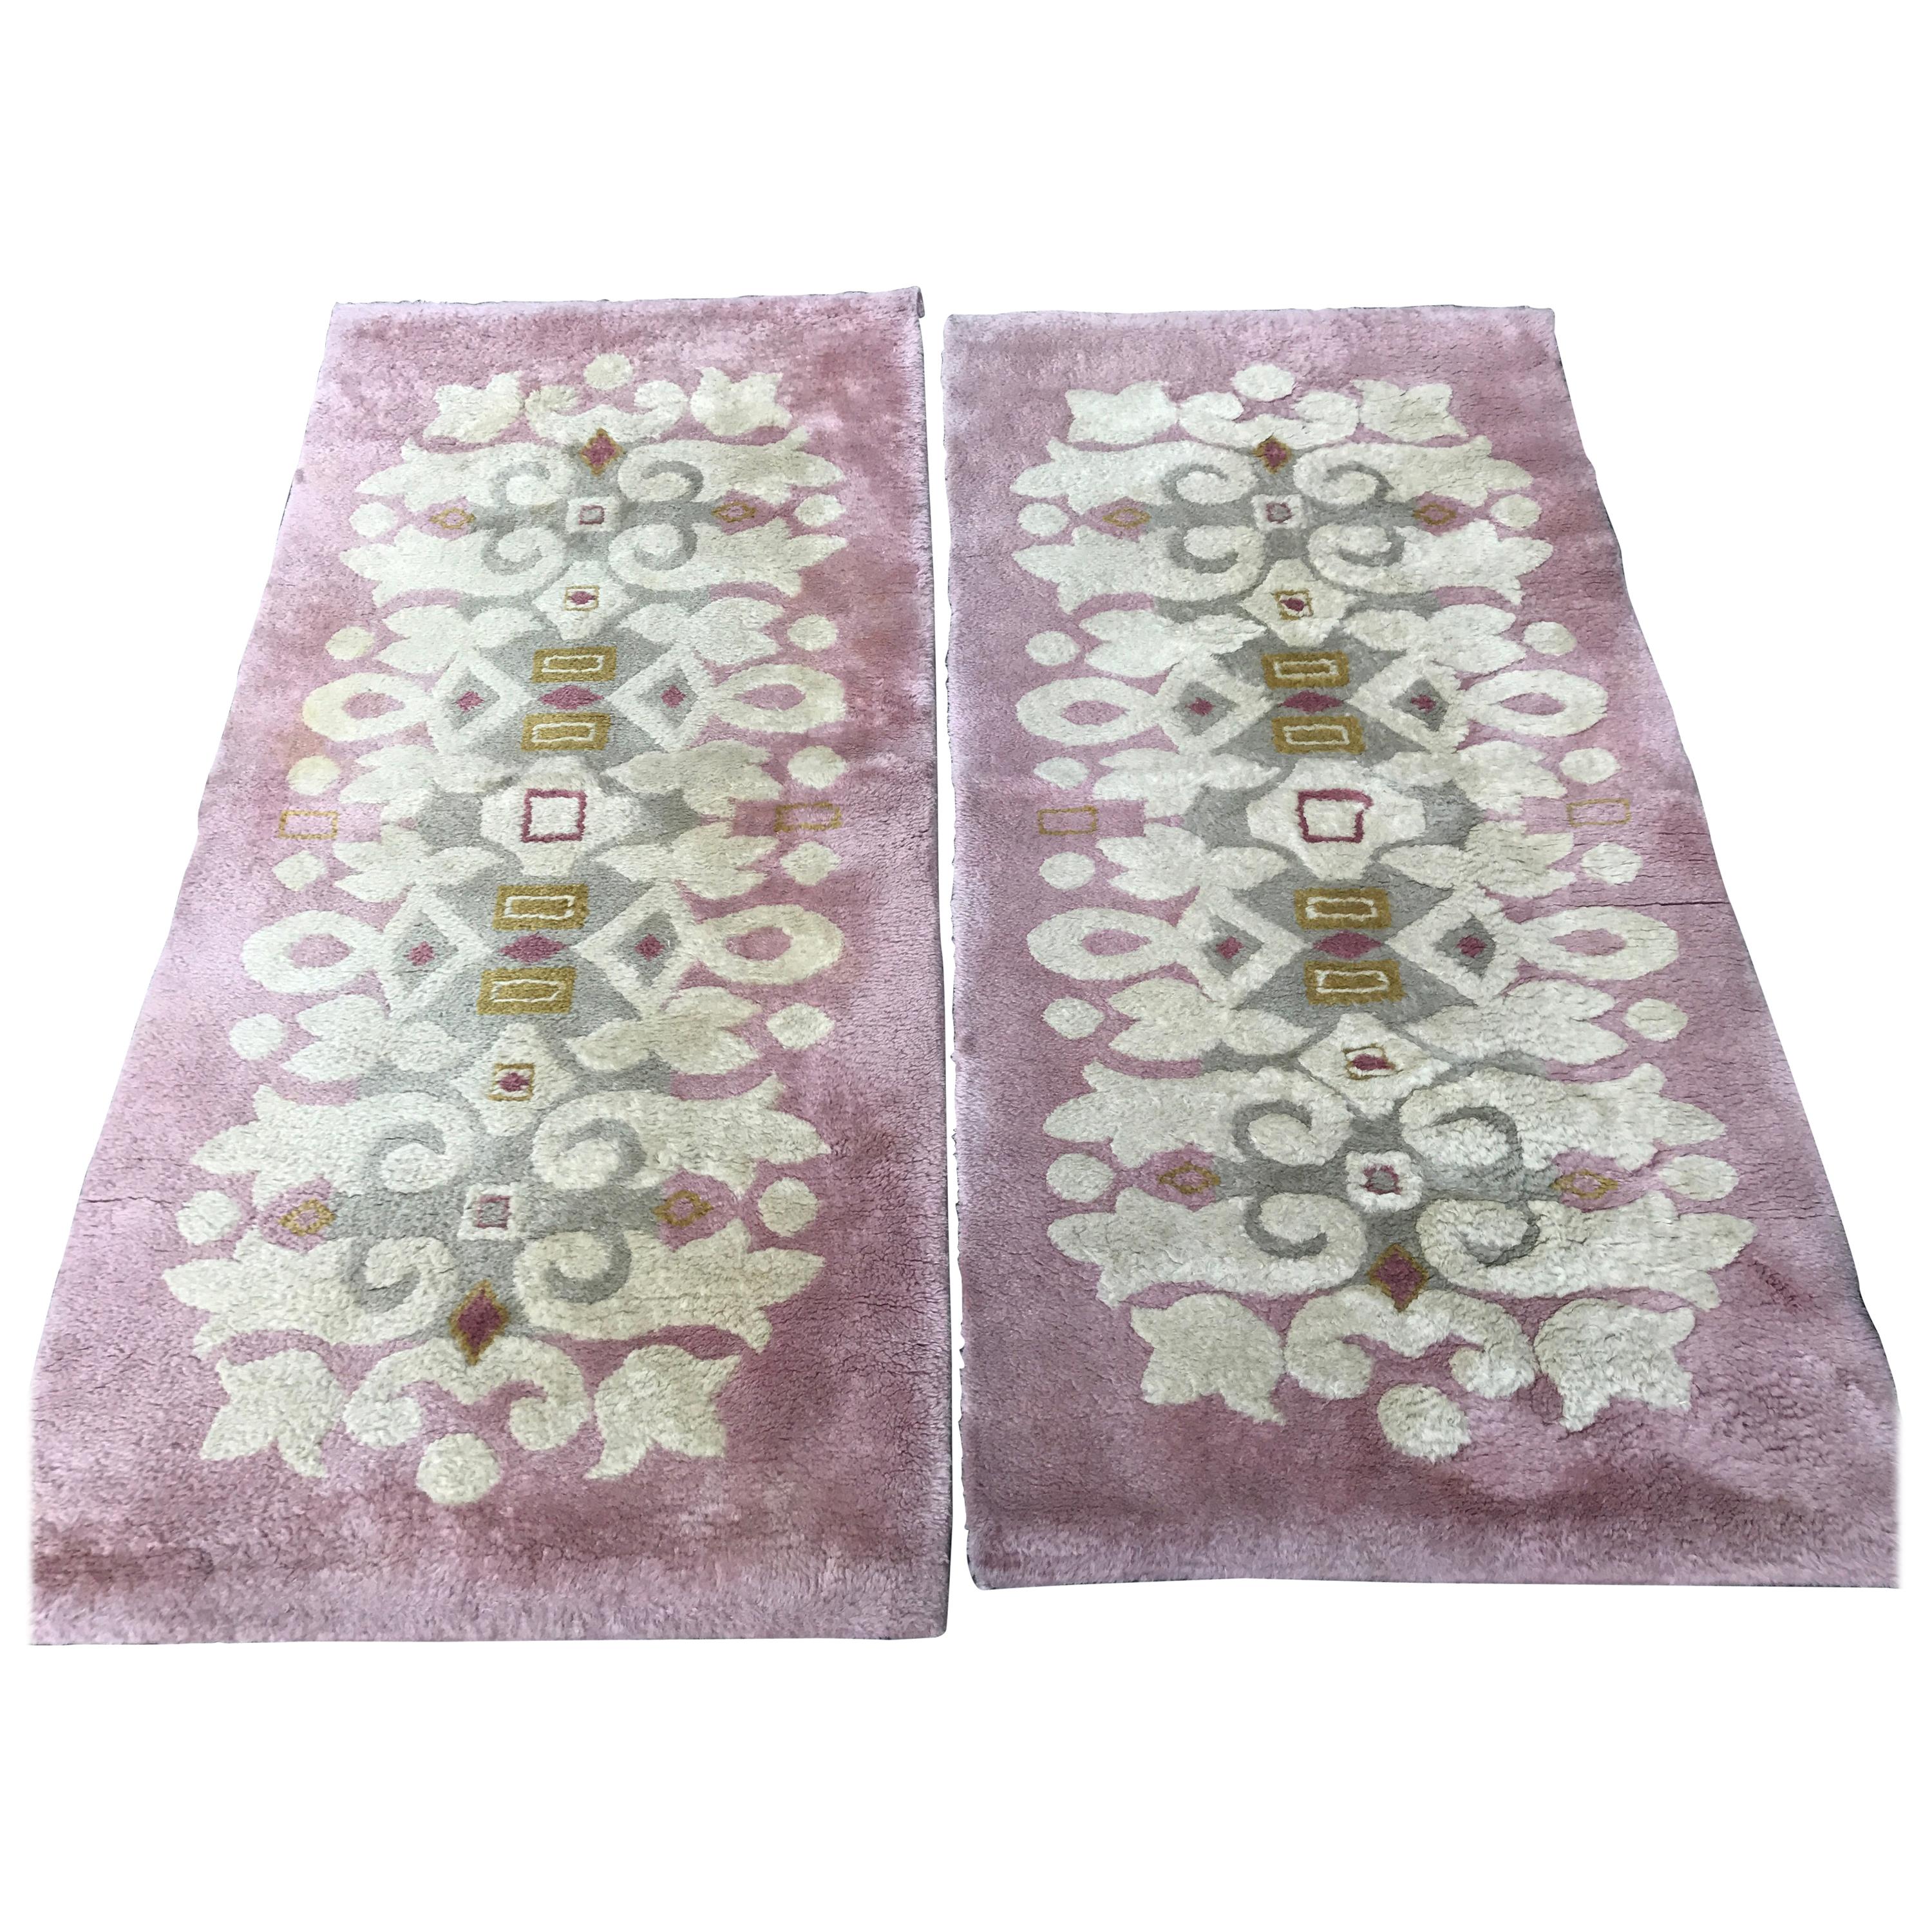 Pair of Leleu Rugs Including Aubusson Knotted Savonnerie Style Rug